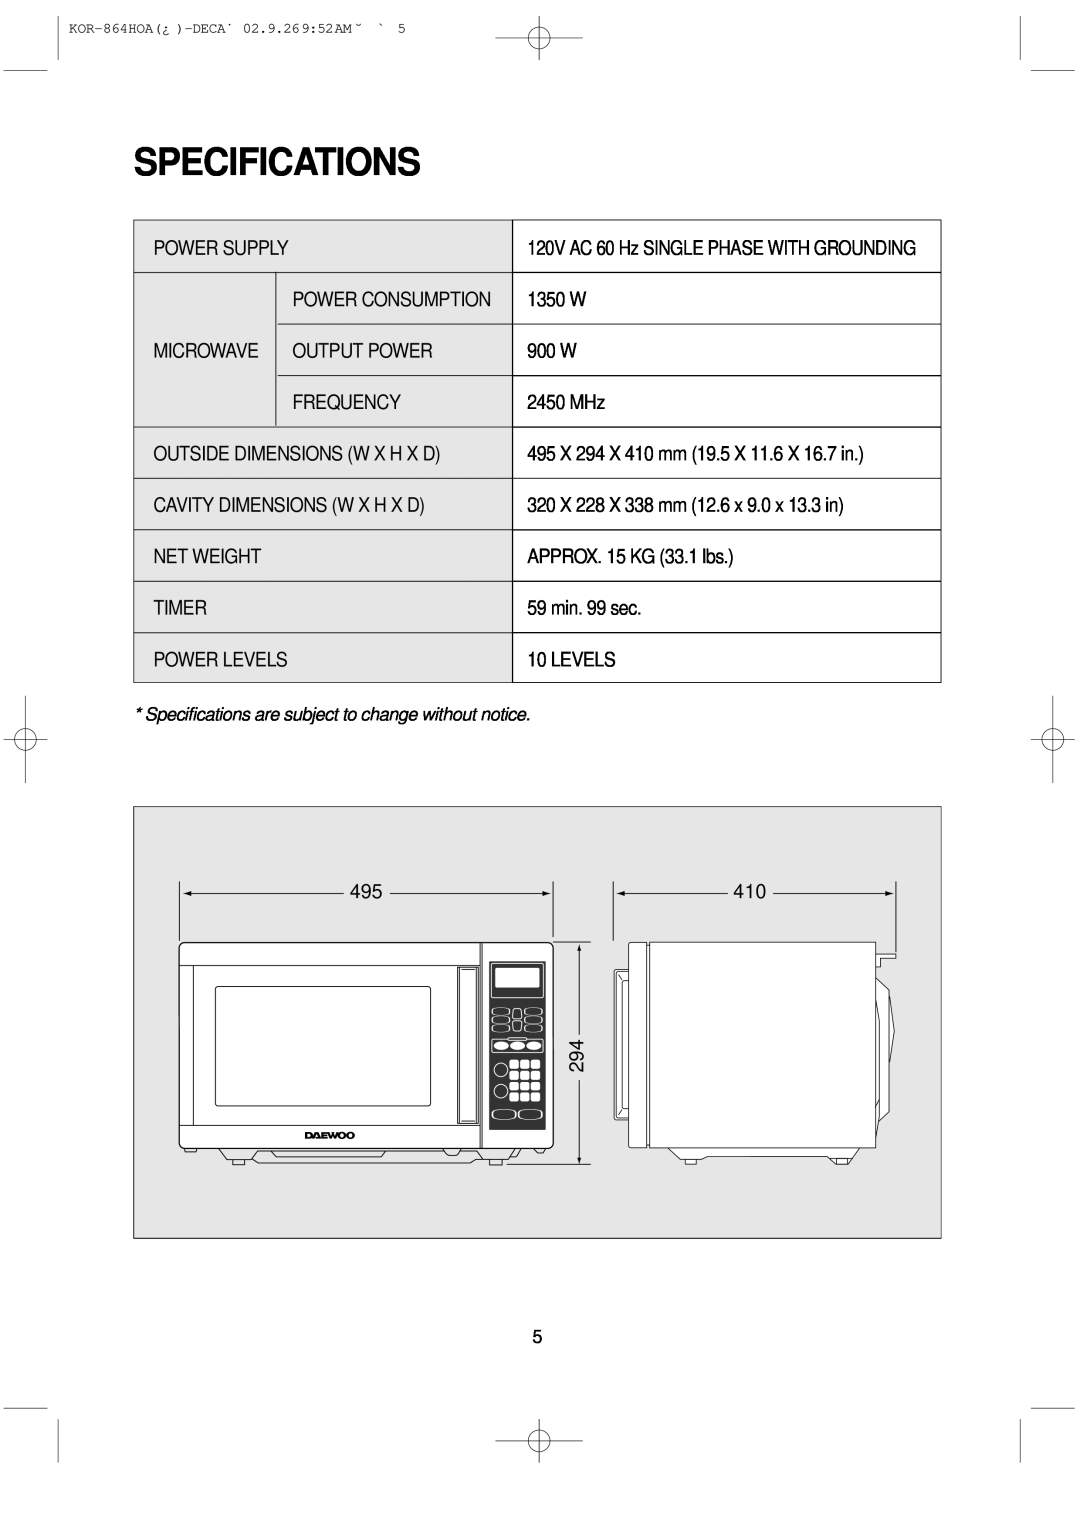 Daewoo KOR-864H operating instructions Specifications 